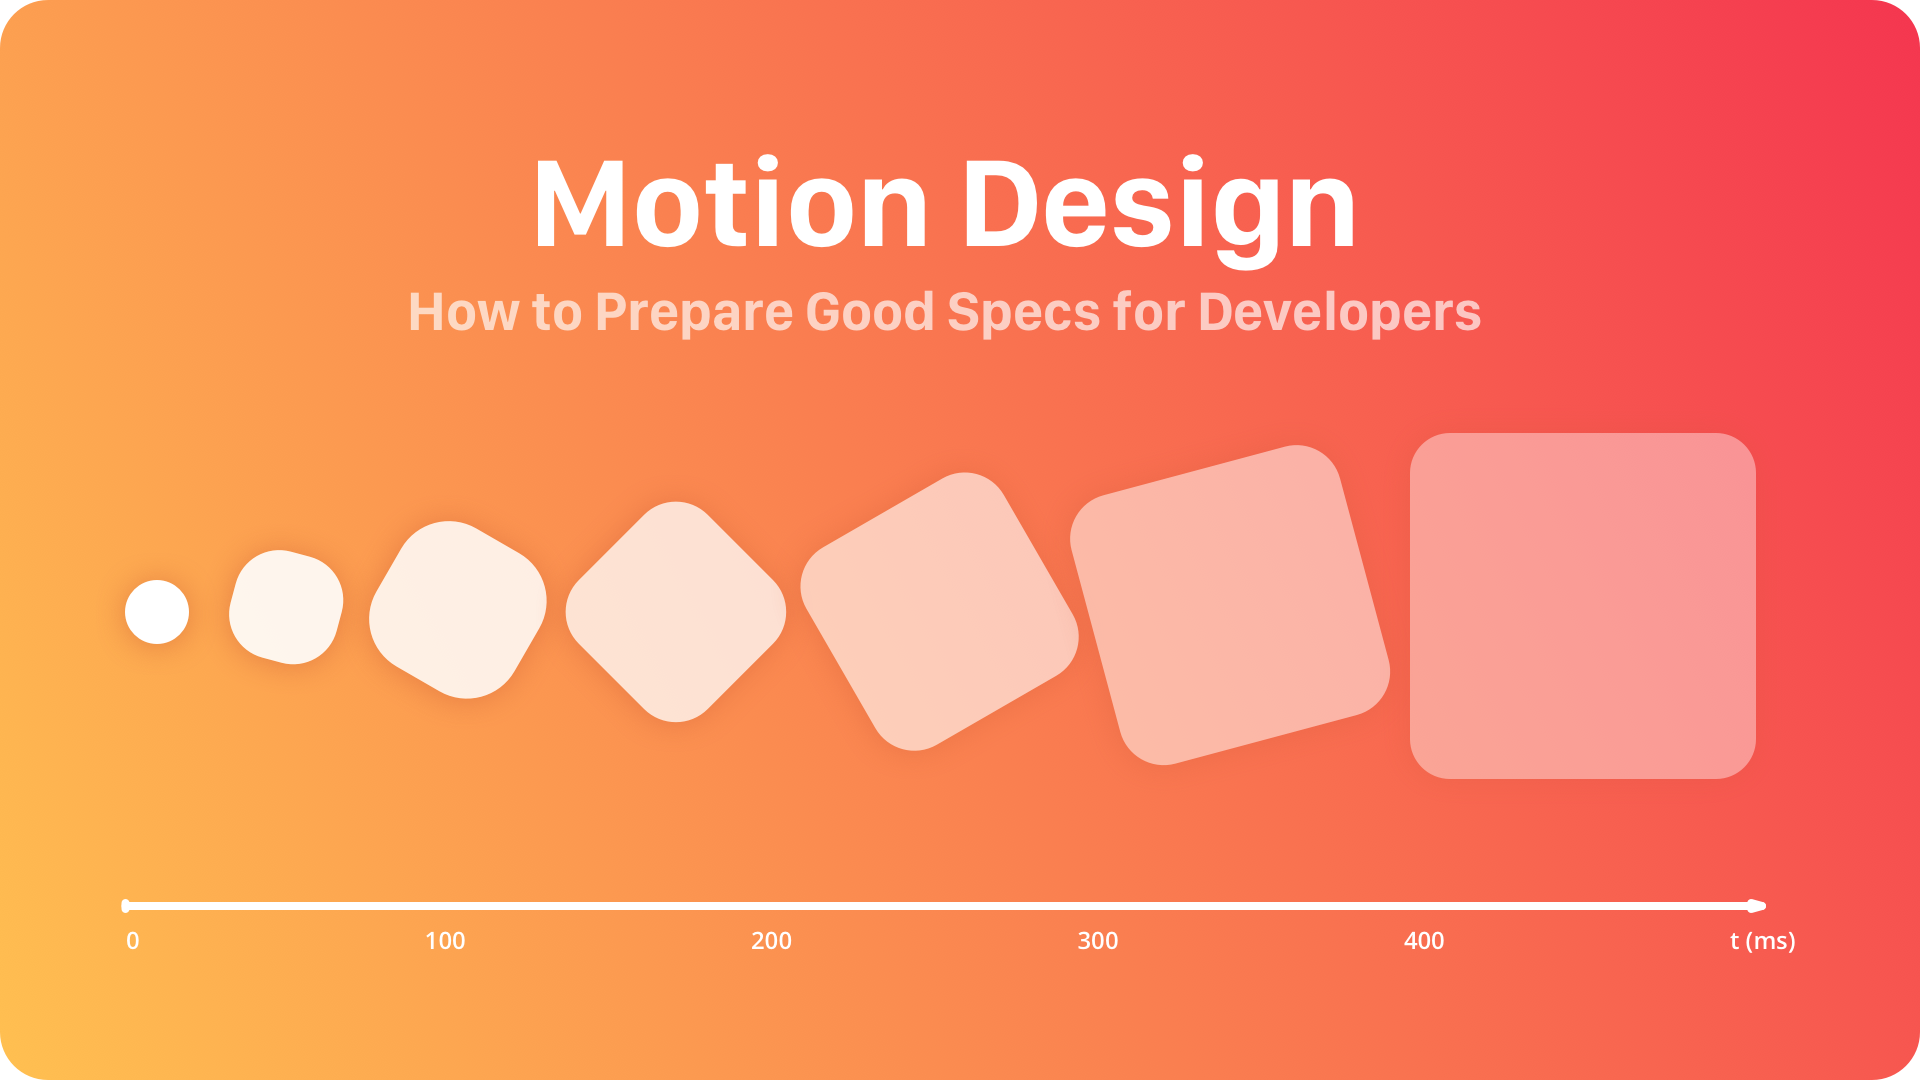 Motion Design is the Future